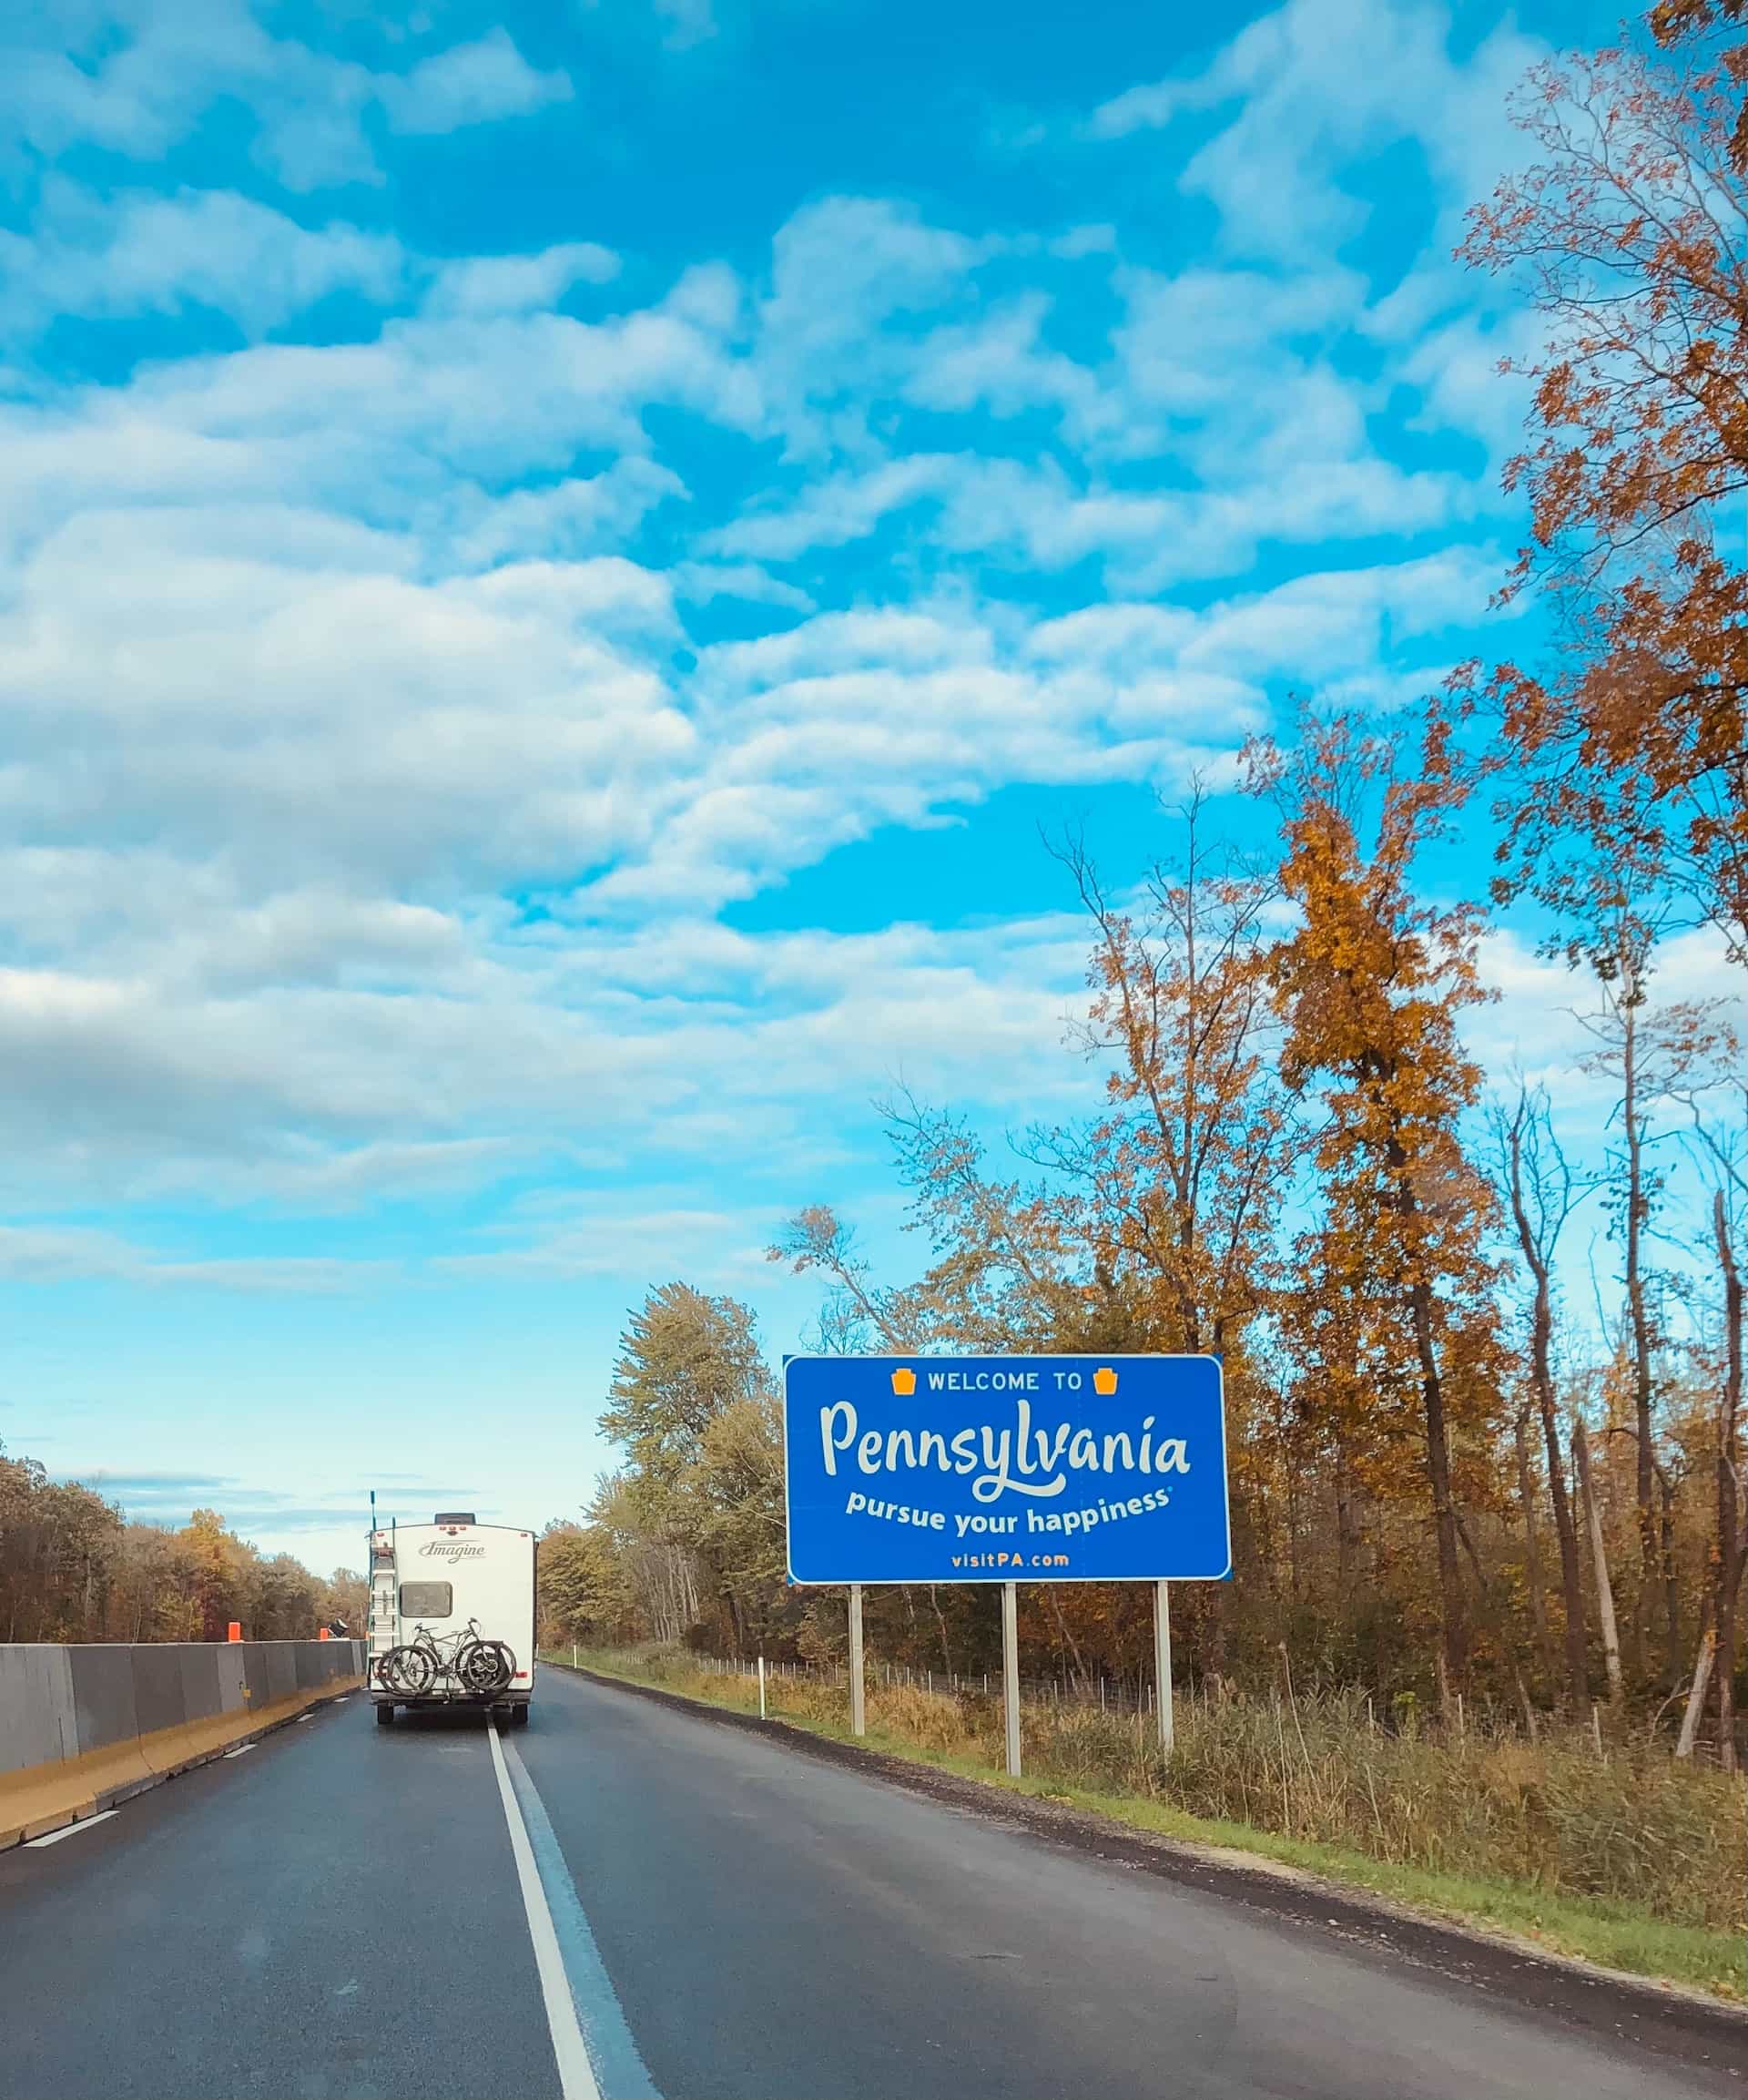 A “Welcome to Pennsylvania” sign on the side of the road.